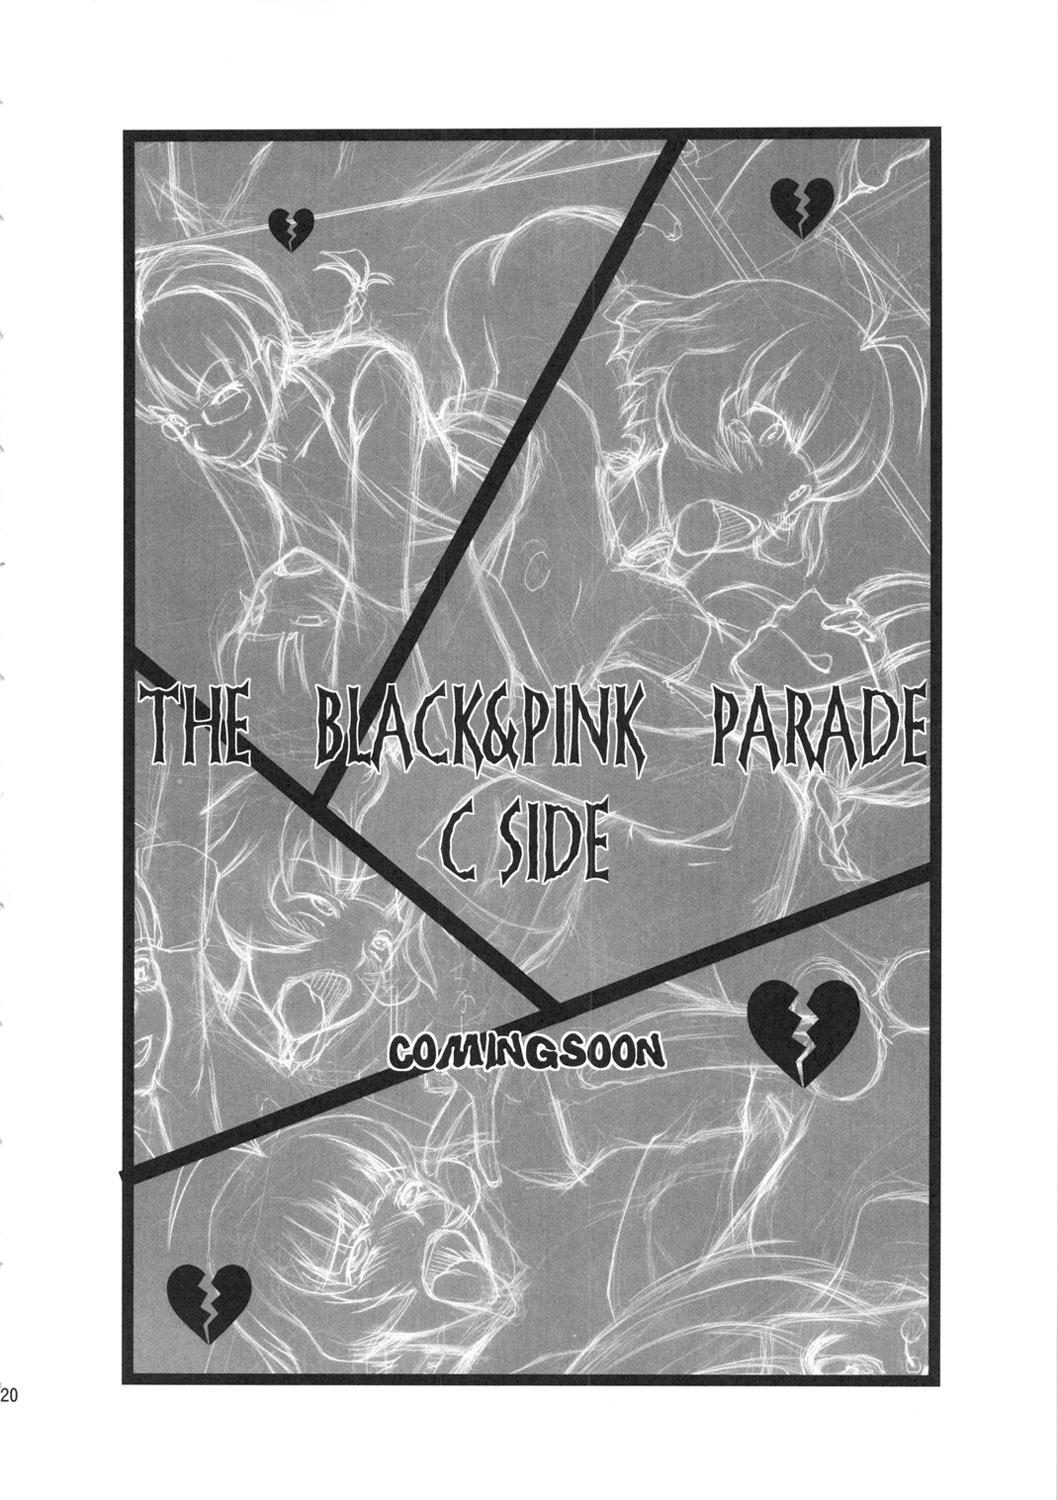 THE BLACK&PINK PARADE B-SIDE 18